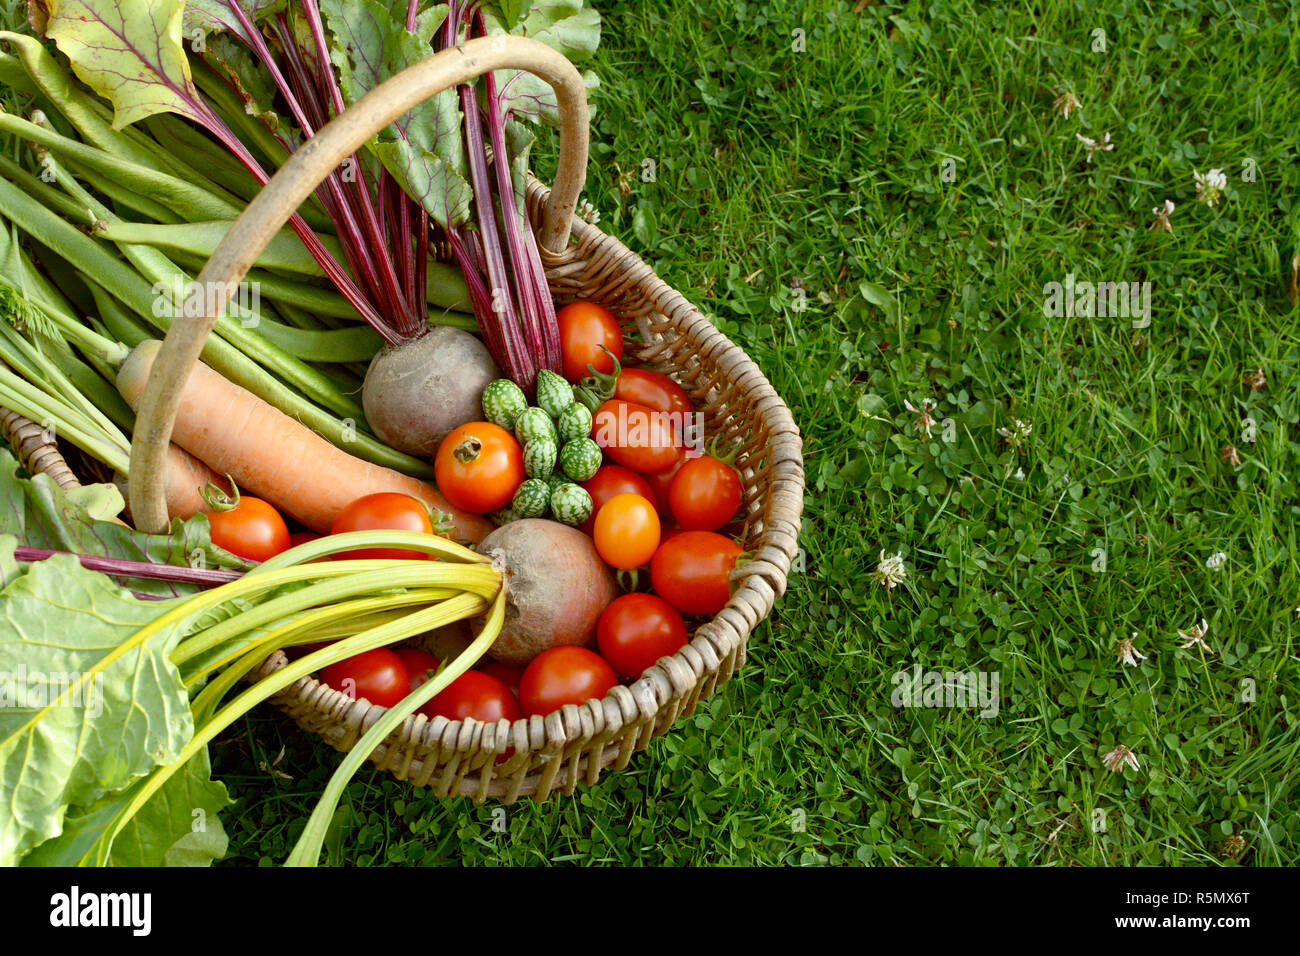 Rustic basket filled with fresh vegetables from an allotment Stock Photo